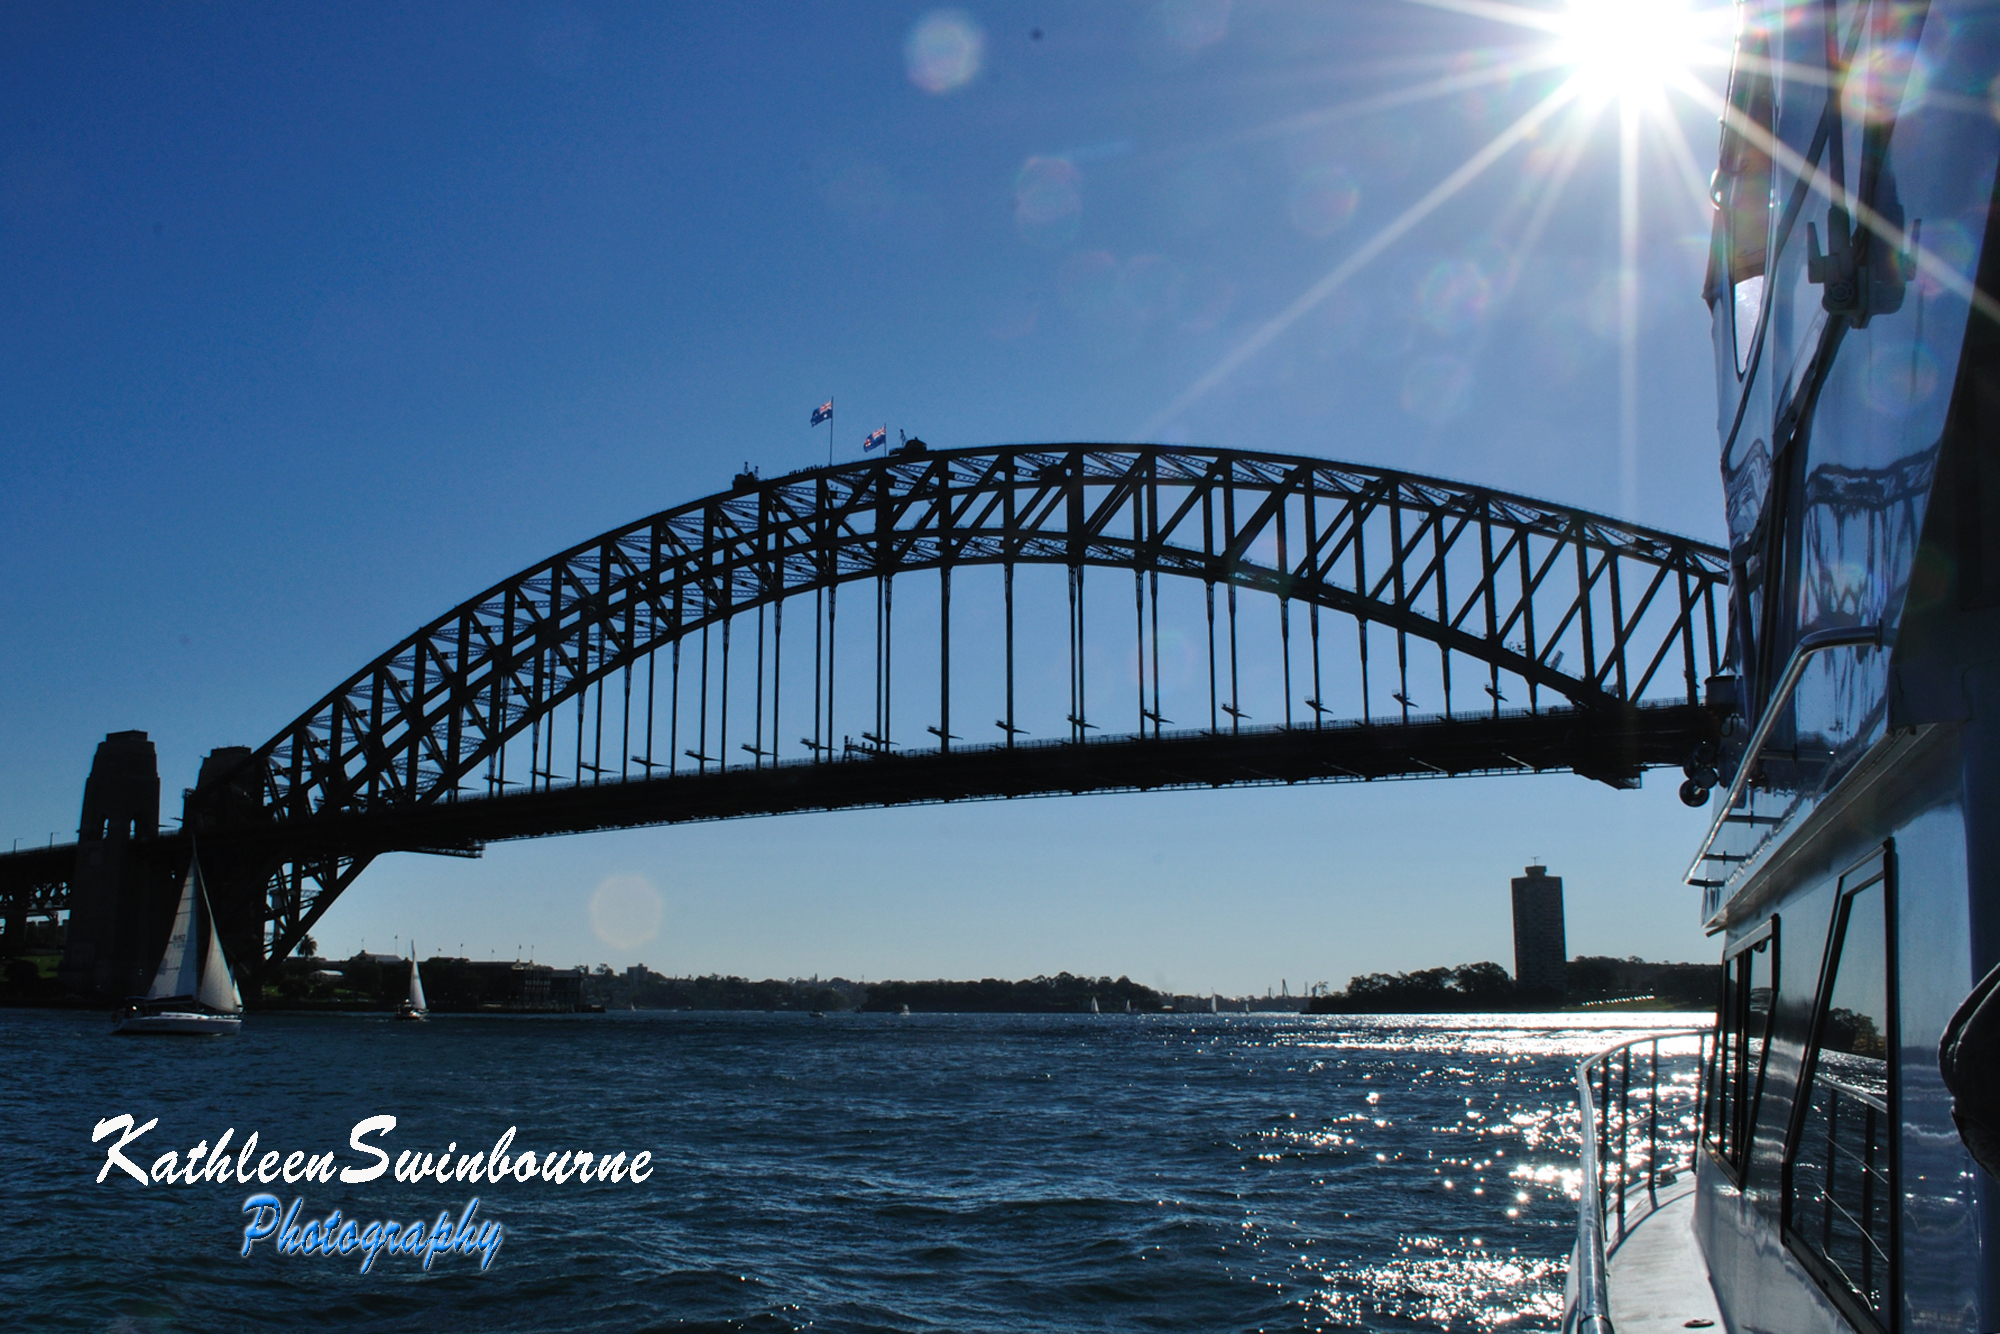 Cruise Sydney Harbour like a local – in luxury